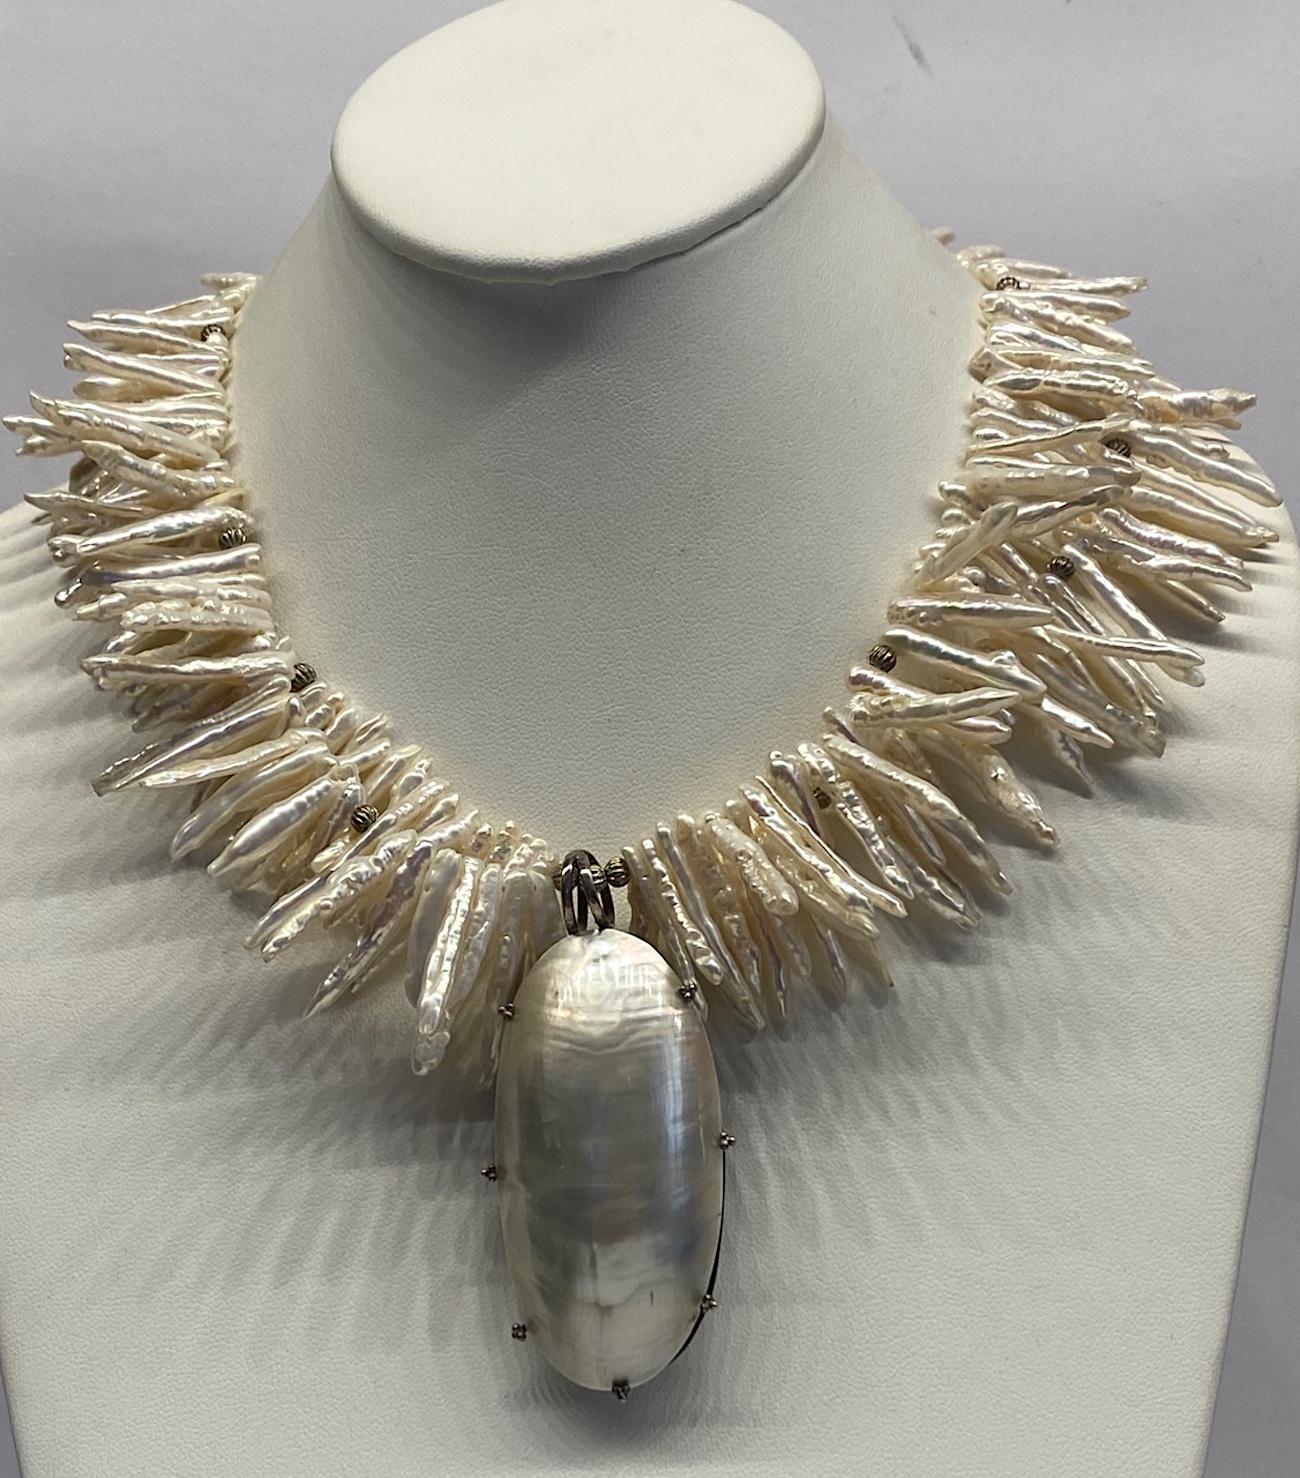 A one of a kind large statement necklace of Biwa pearls and sterling silver from the estate of Aileen Mehl known as Suzy. Aileen wrote the column 